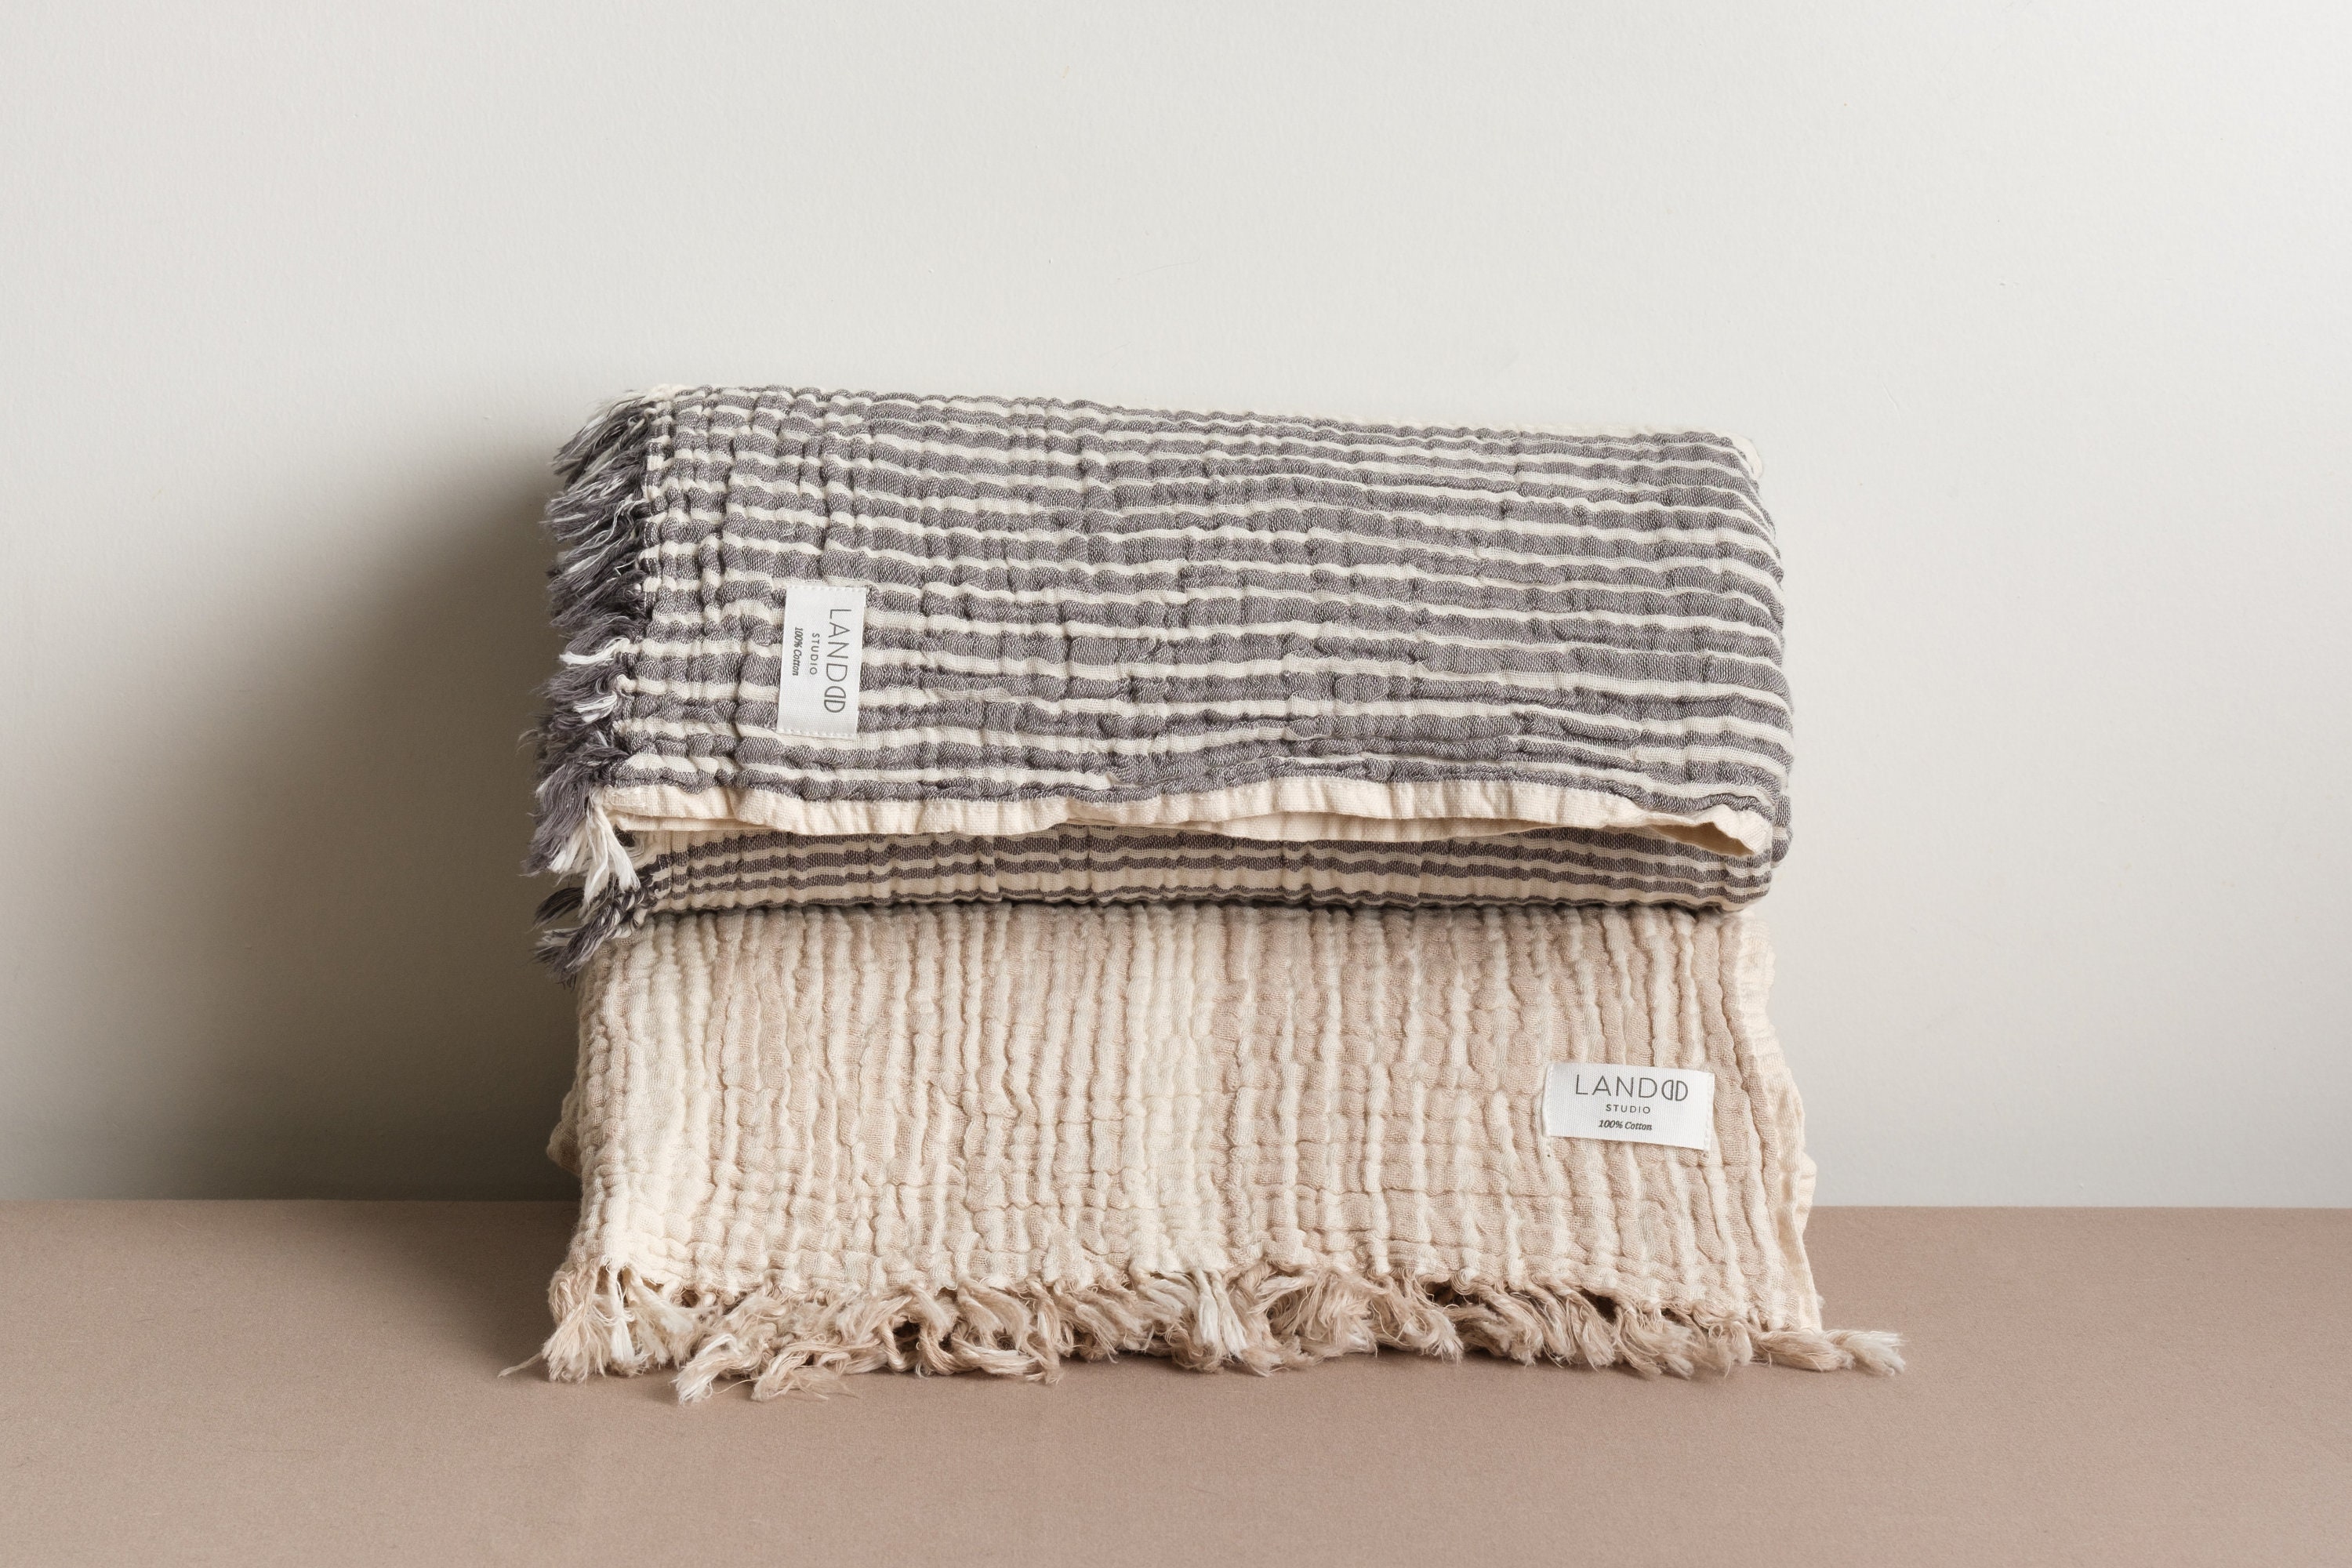 100% Cotton Handwoven Yoga Blanket Impeccably Designed – Priti Collection.  Tools for an enlightened life.